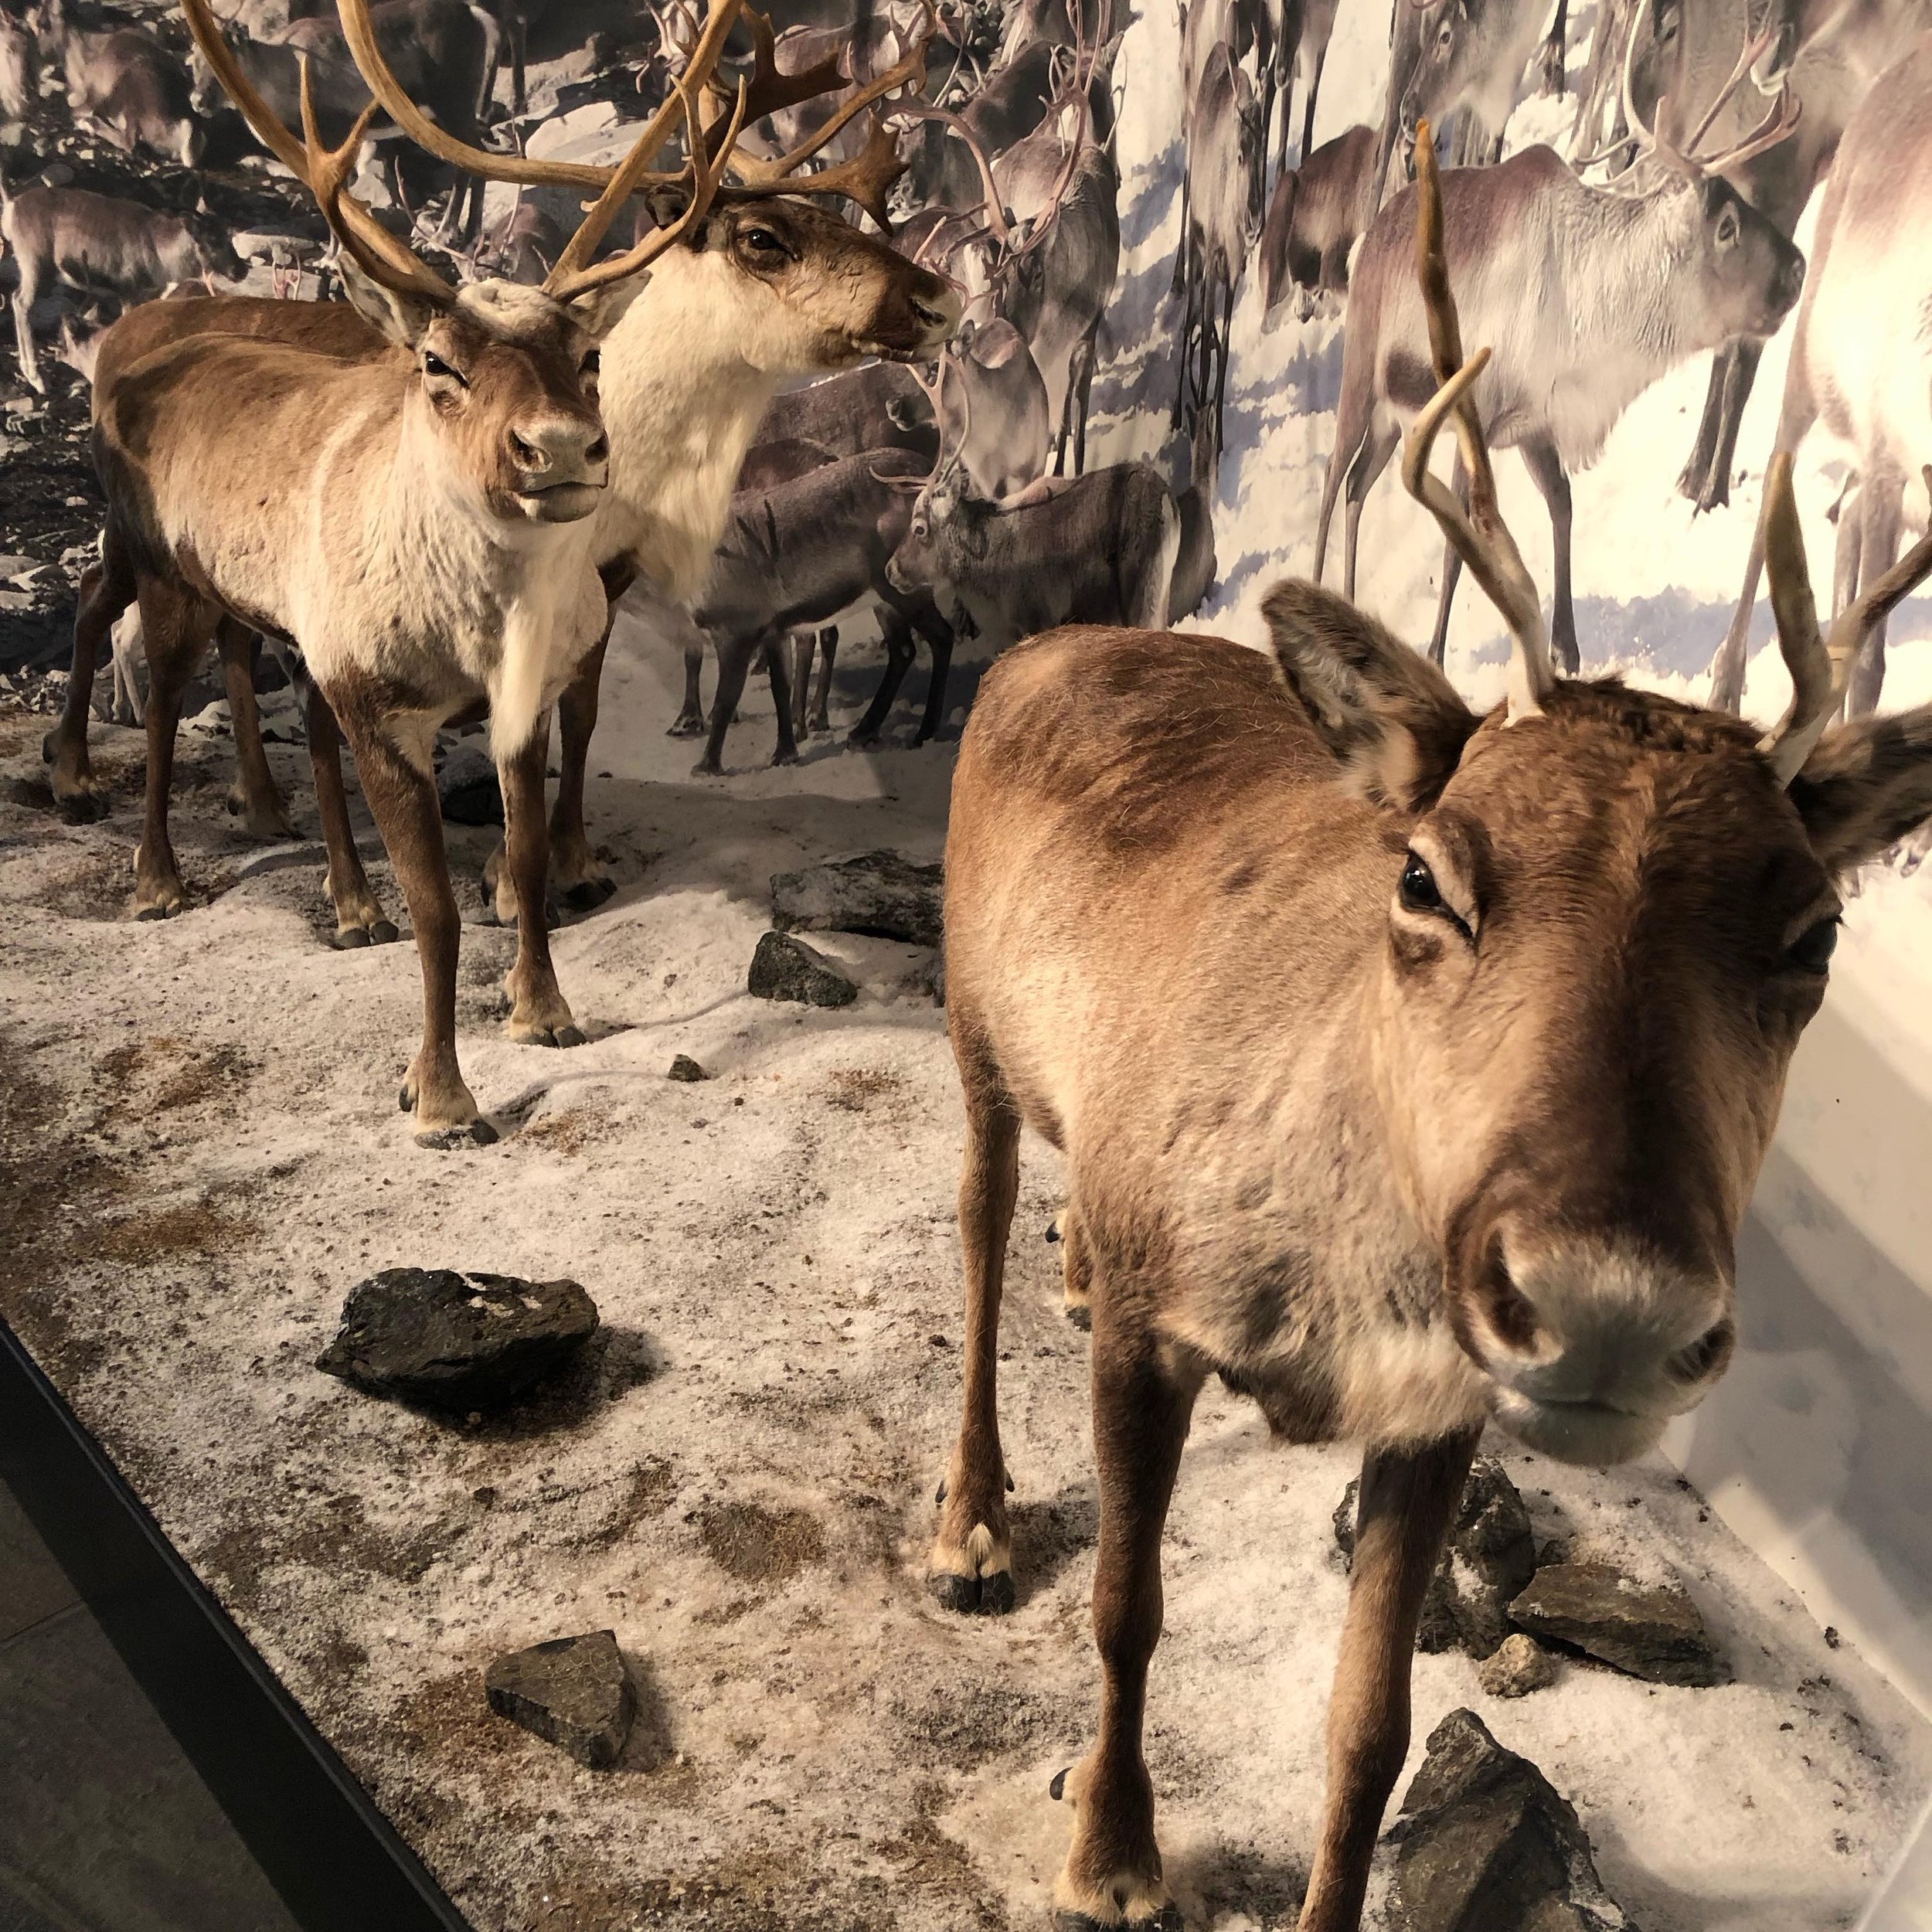 Did you know ????

That reindeers change eye color in the winter season? 

You wanna find out more about reindeers? 
We are open daily from 10:00 - 18:00 🕕